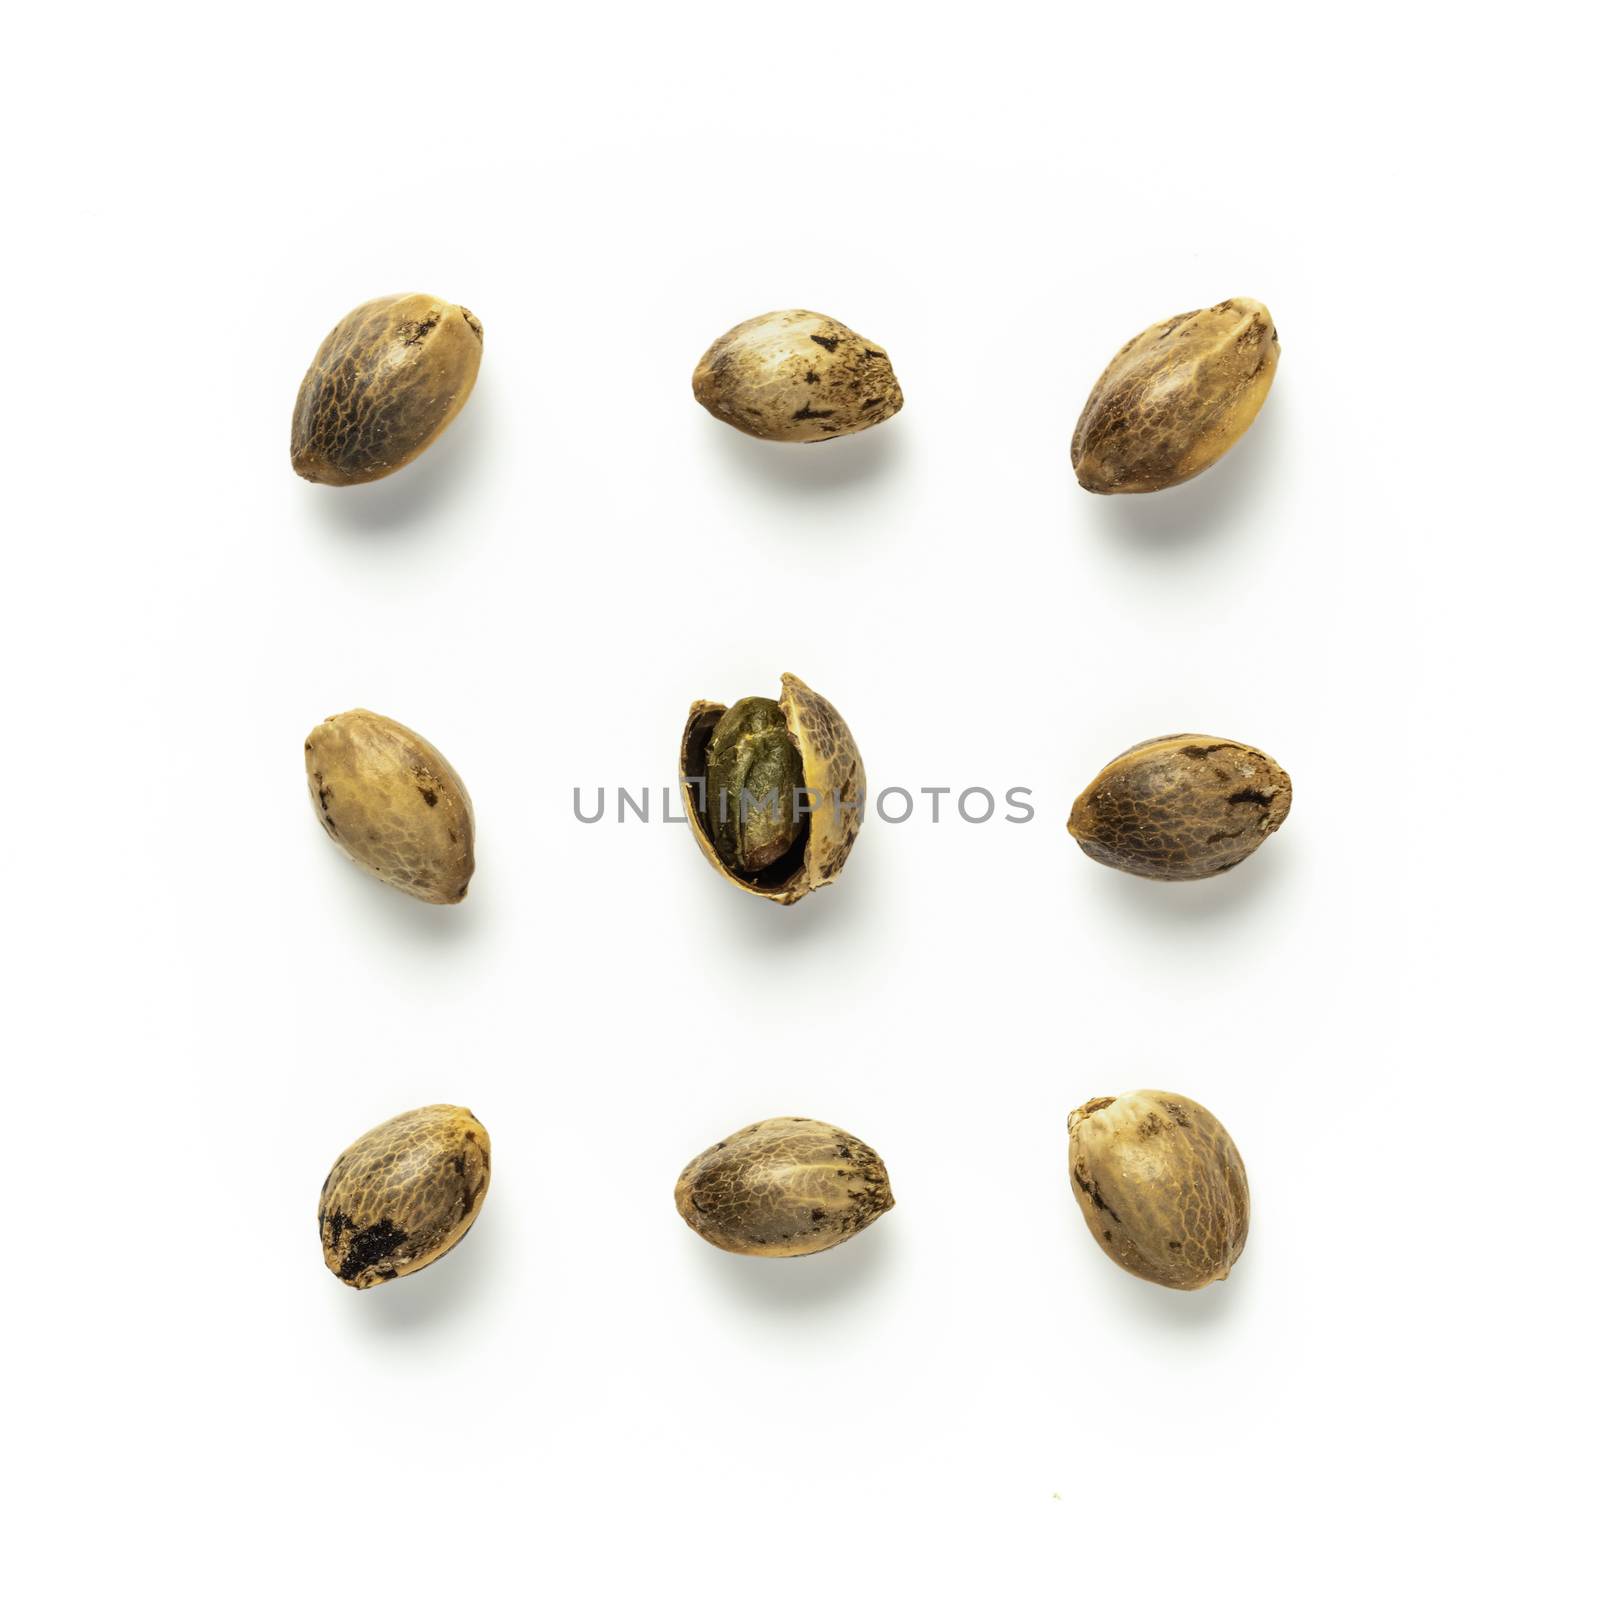 Creative layout of hemp seeds. Superfood hemp concept. Top view of nine cannabis or hemp seeds with copy space. Isolated on white with clipping path.